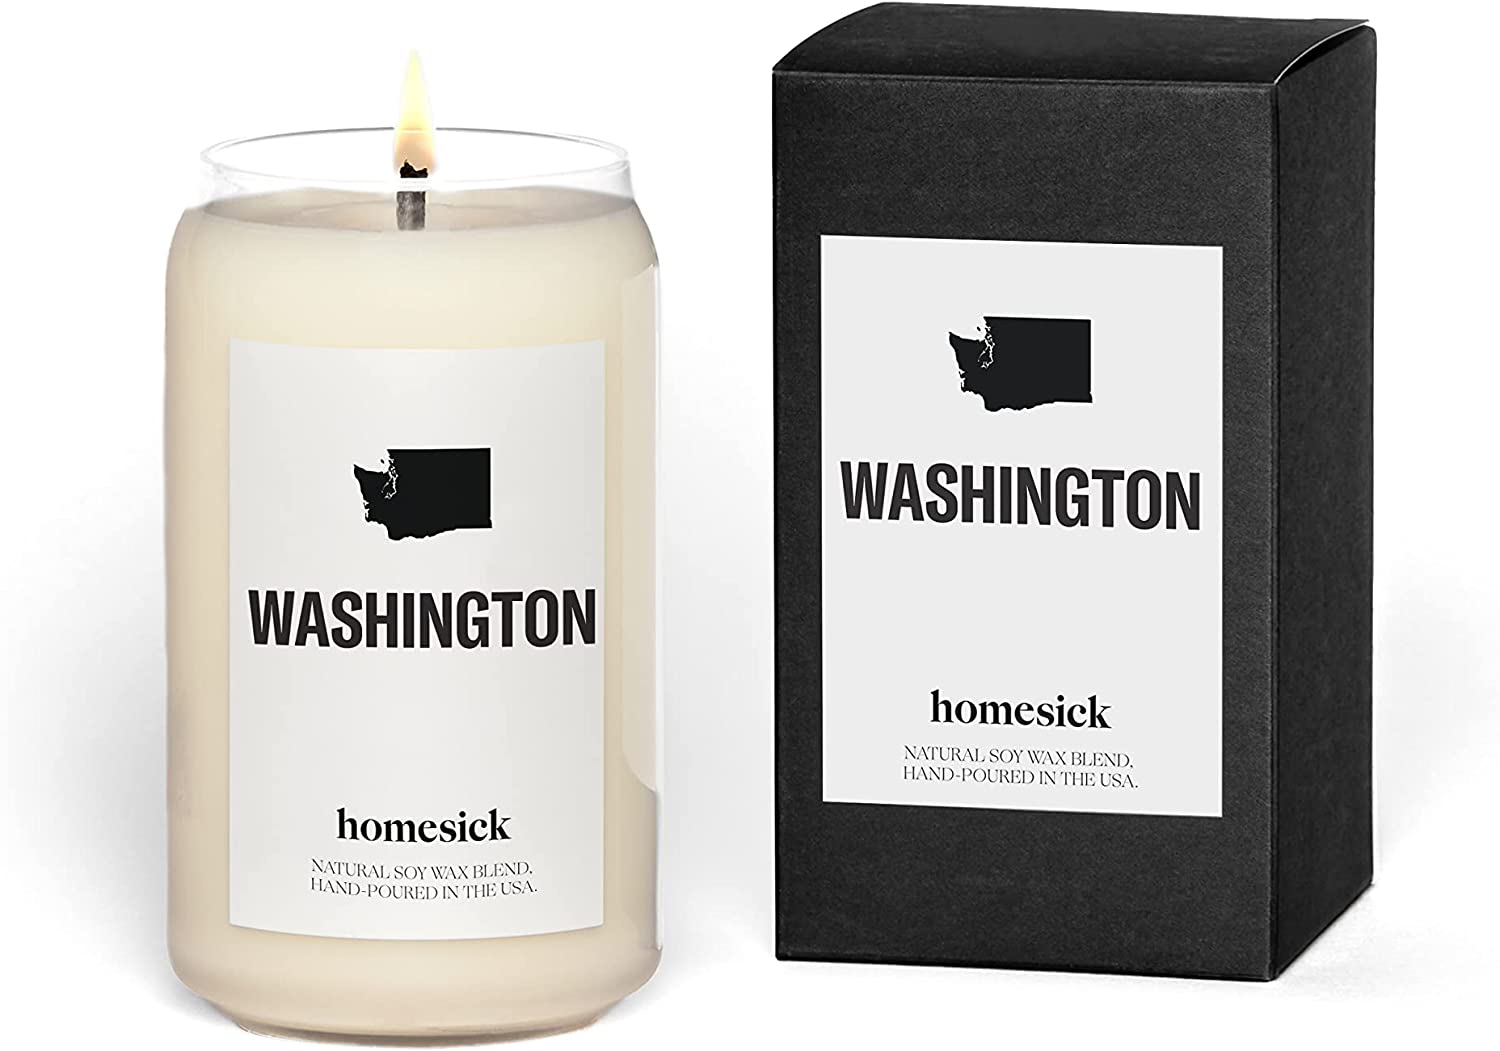 Homesick Hand Poured Washington Scented Candle